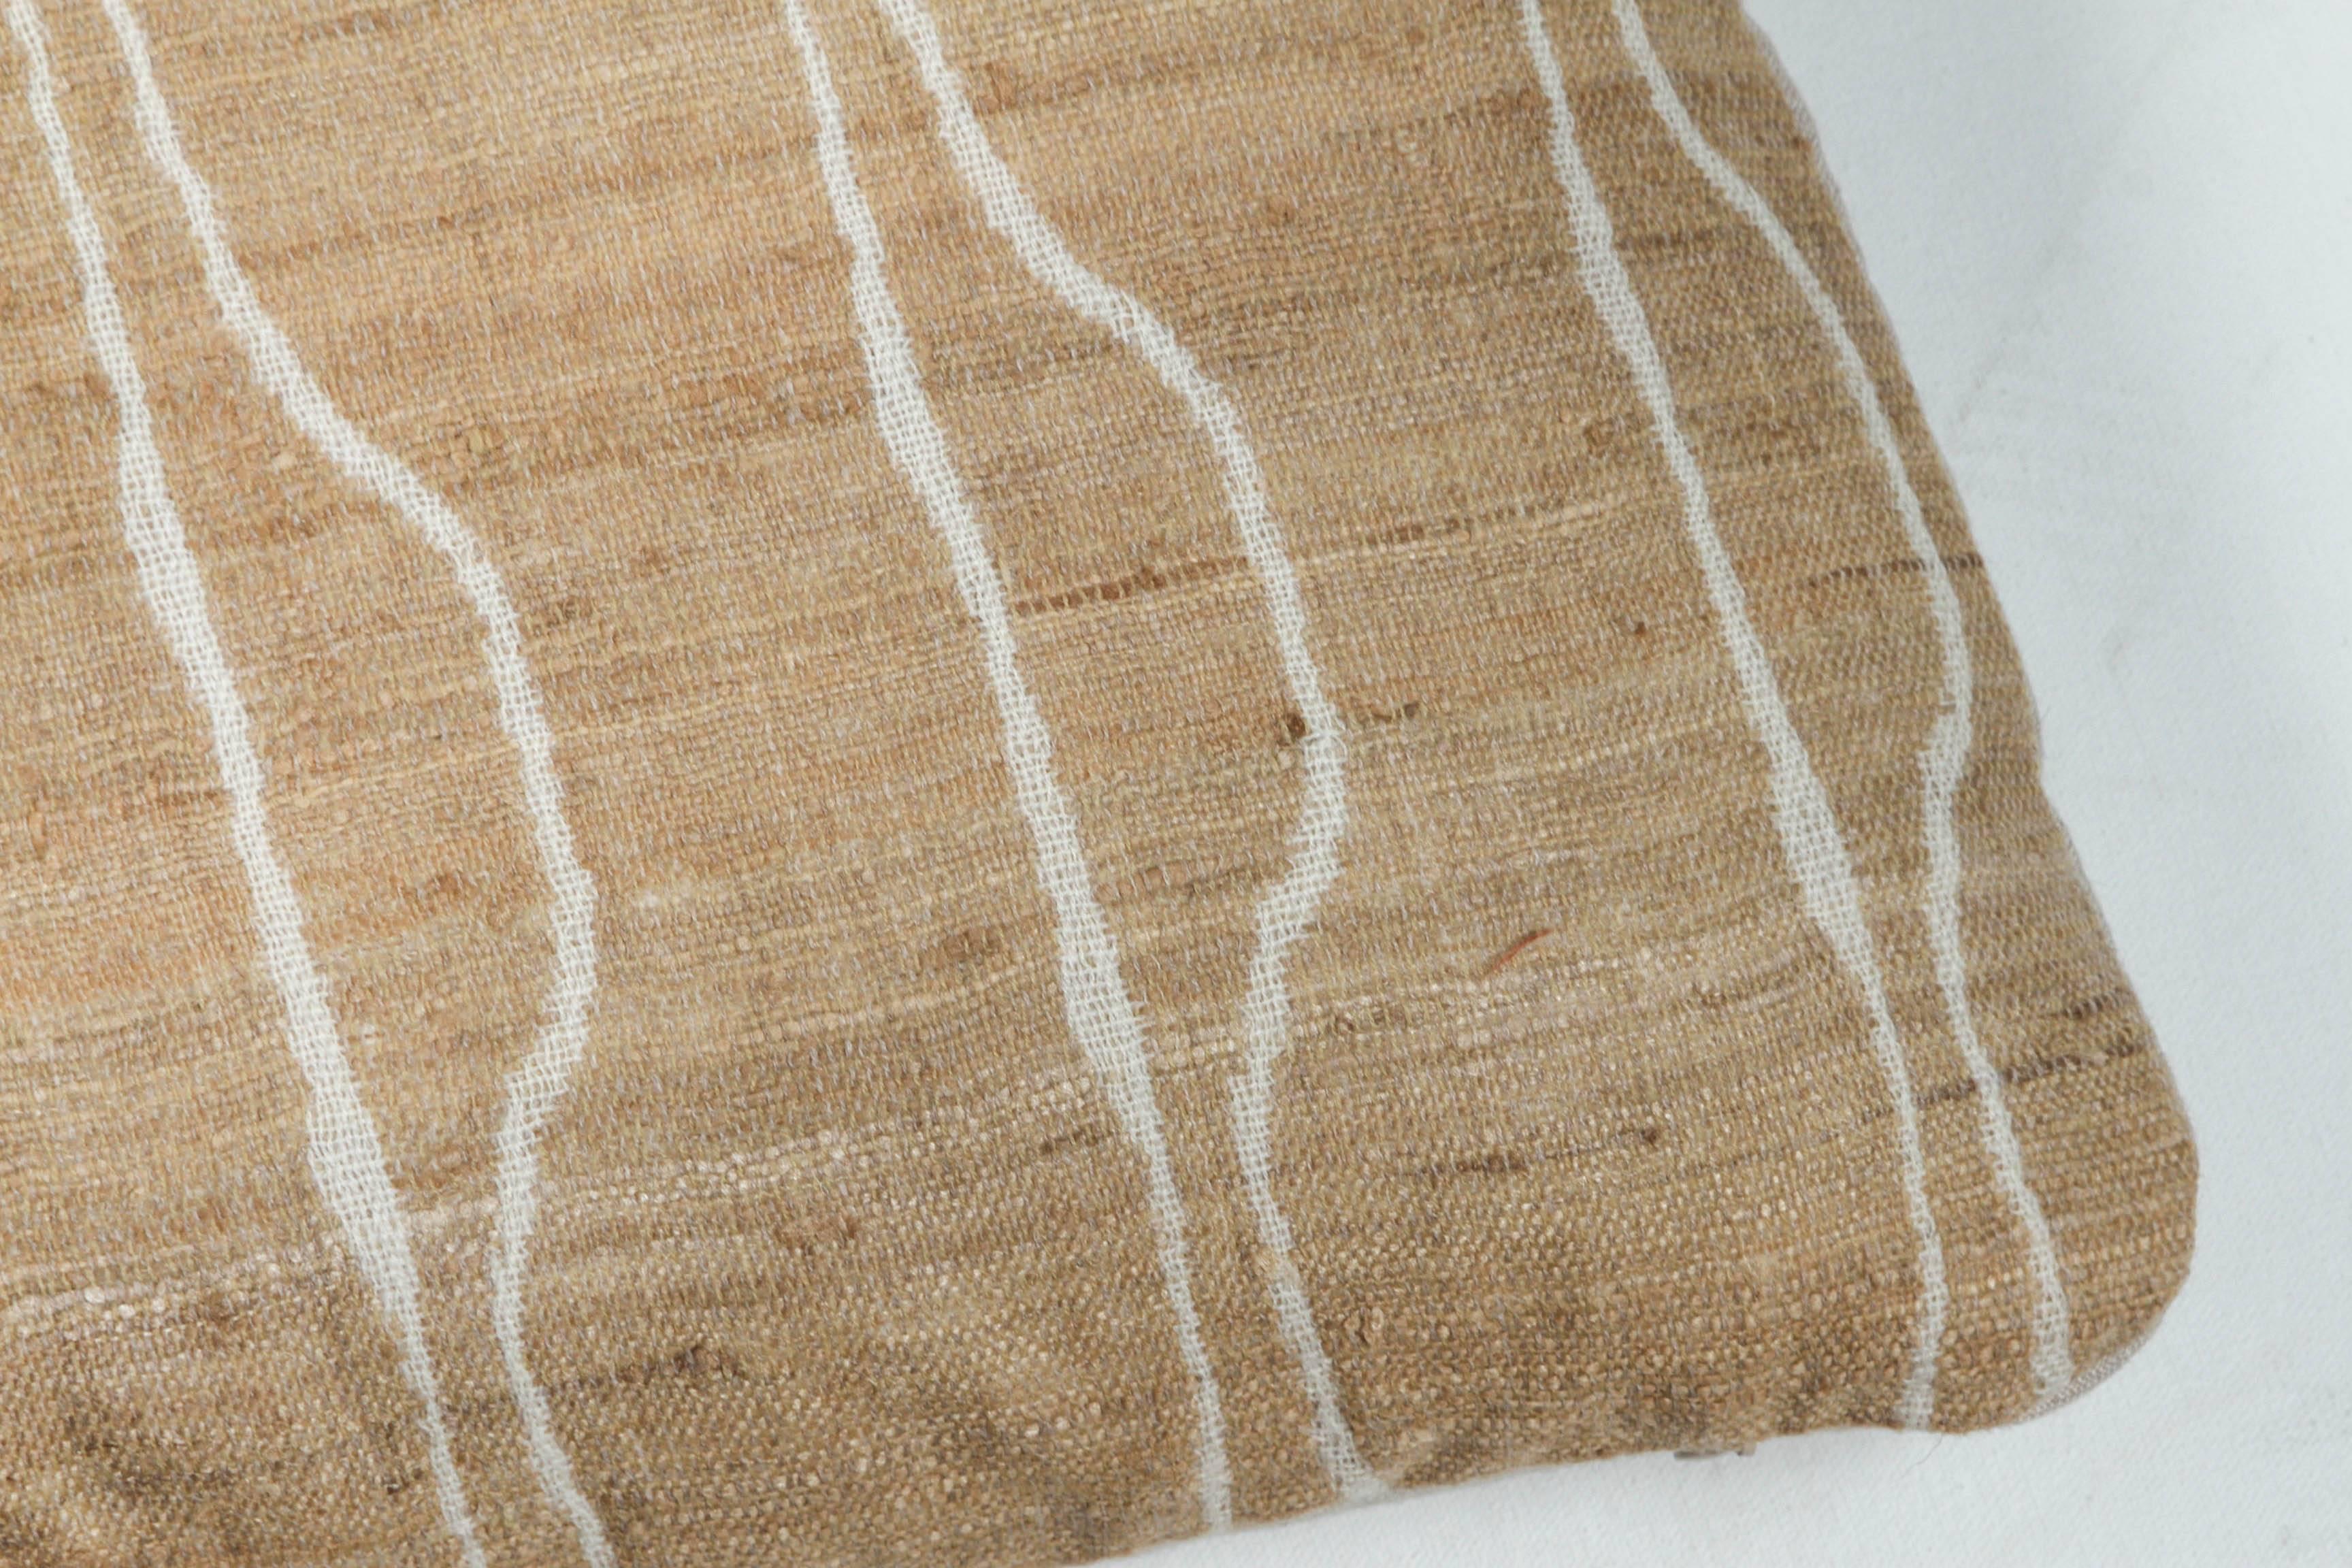 Indian Handwoven Pillow in Ivory and Oatmeal In Good Condition For Sale In Los Angeles, CA